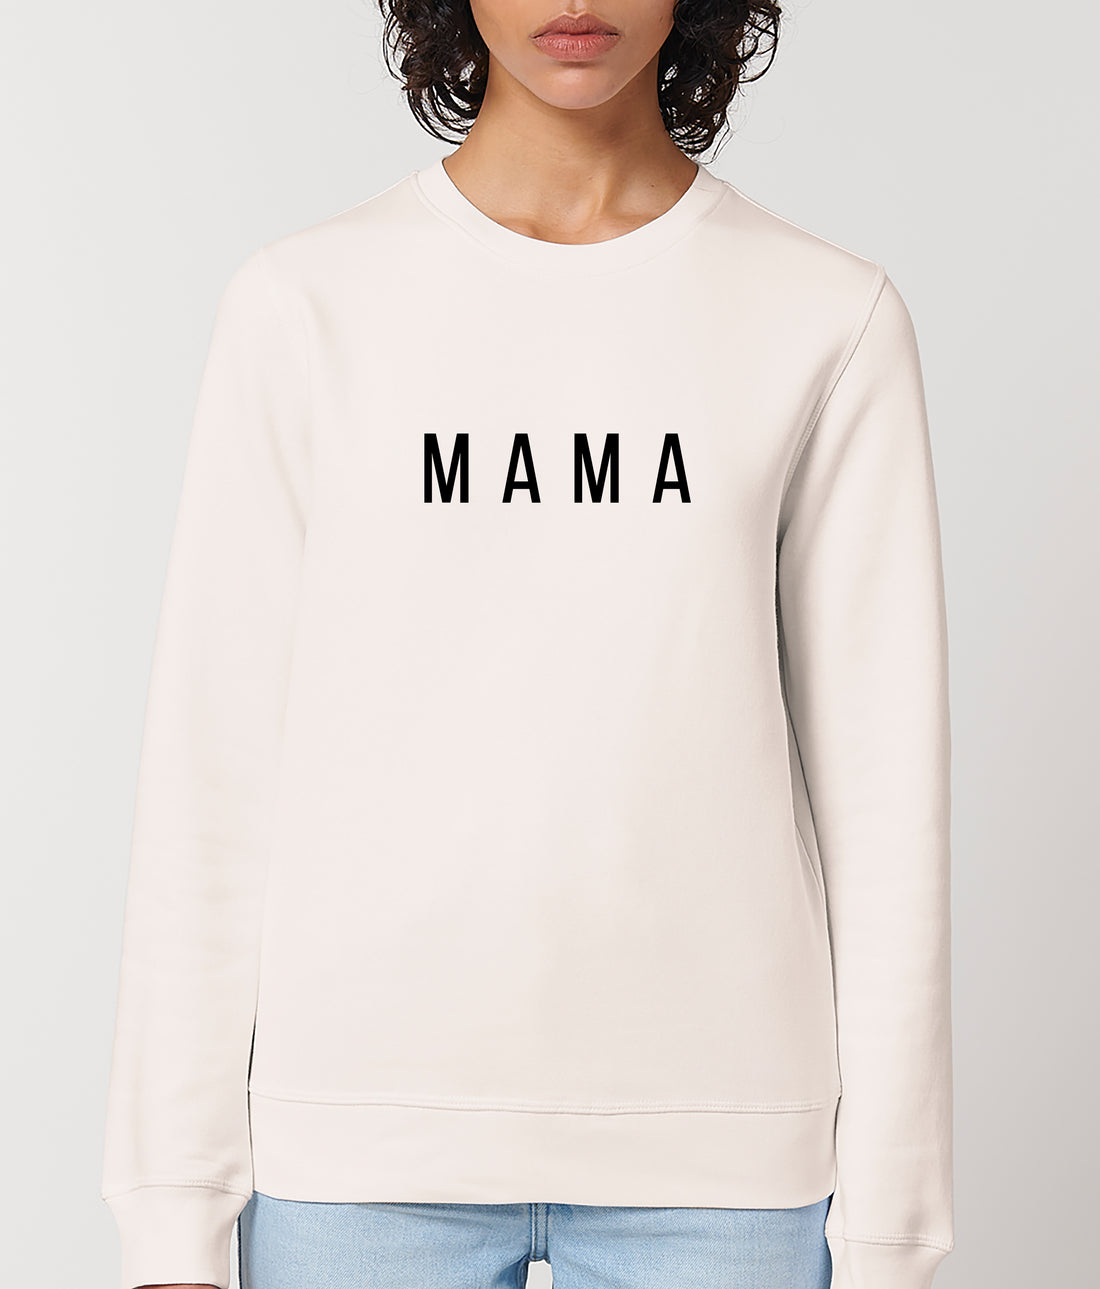  Mama Organic Cotton Sweater. A lovely gift for Mother's Day. Available with matching MINI sweater for children.